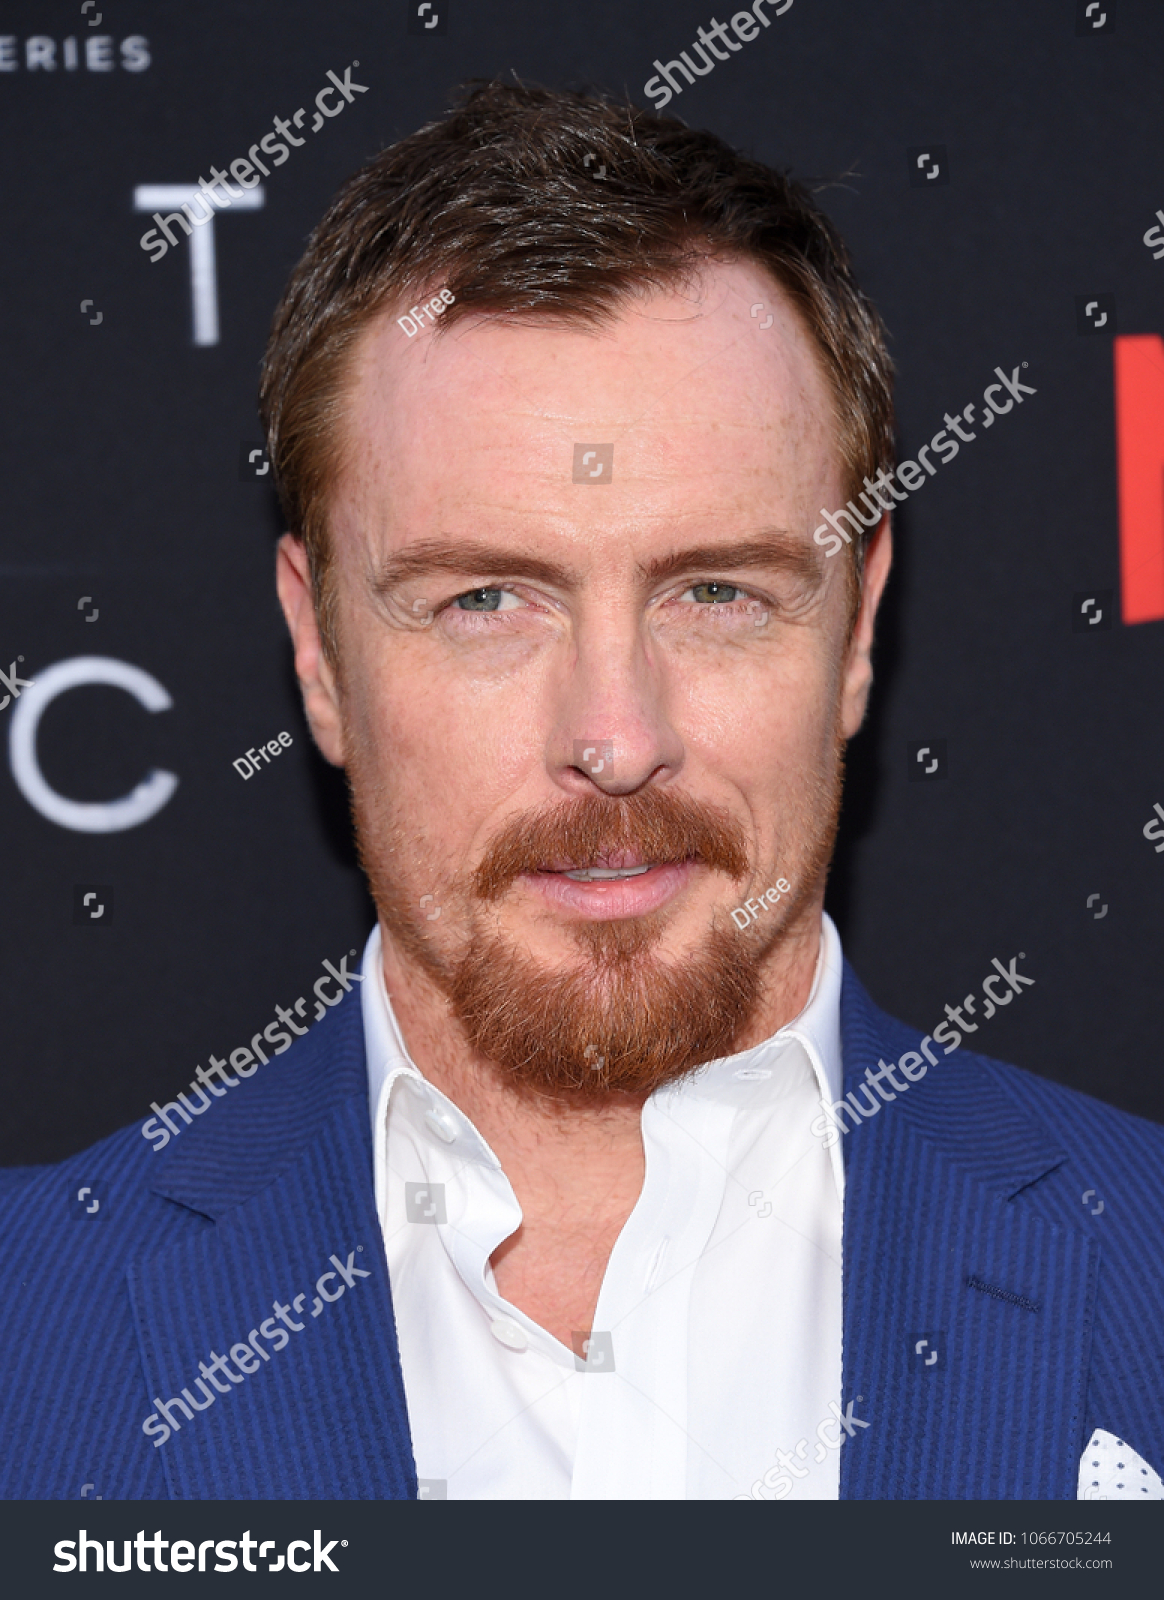 Toby Stephens by Lucony on DeviantArt